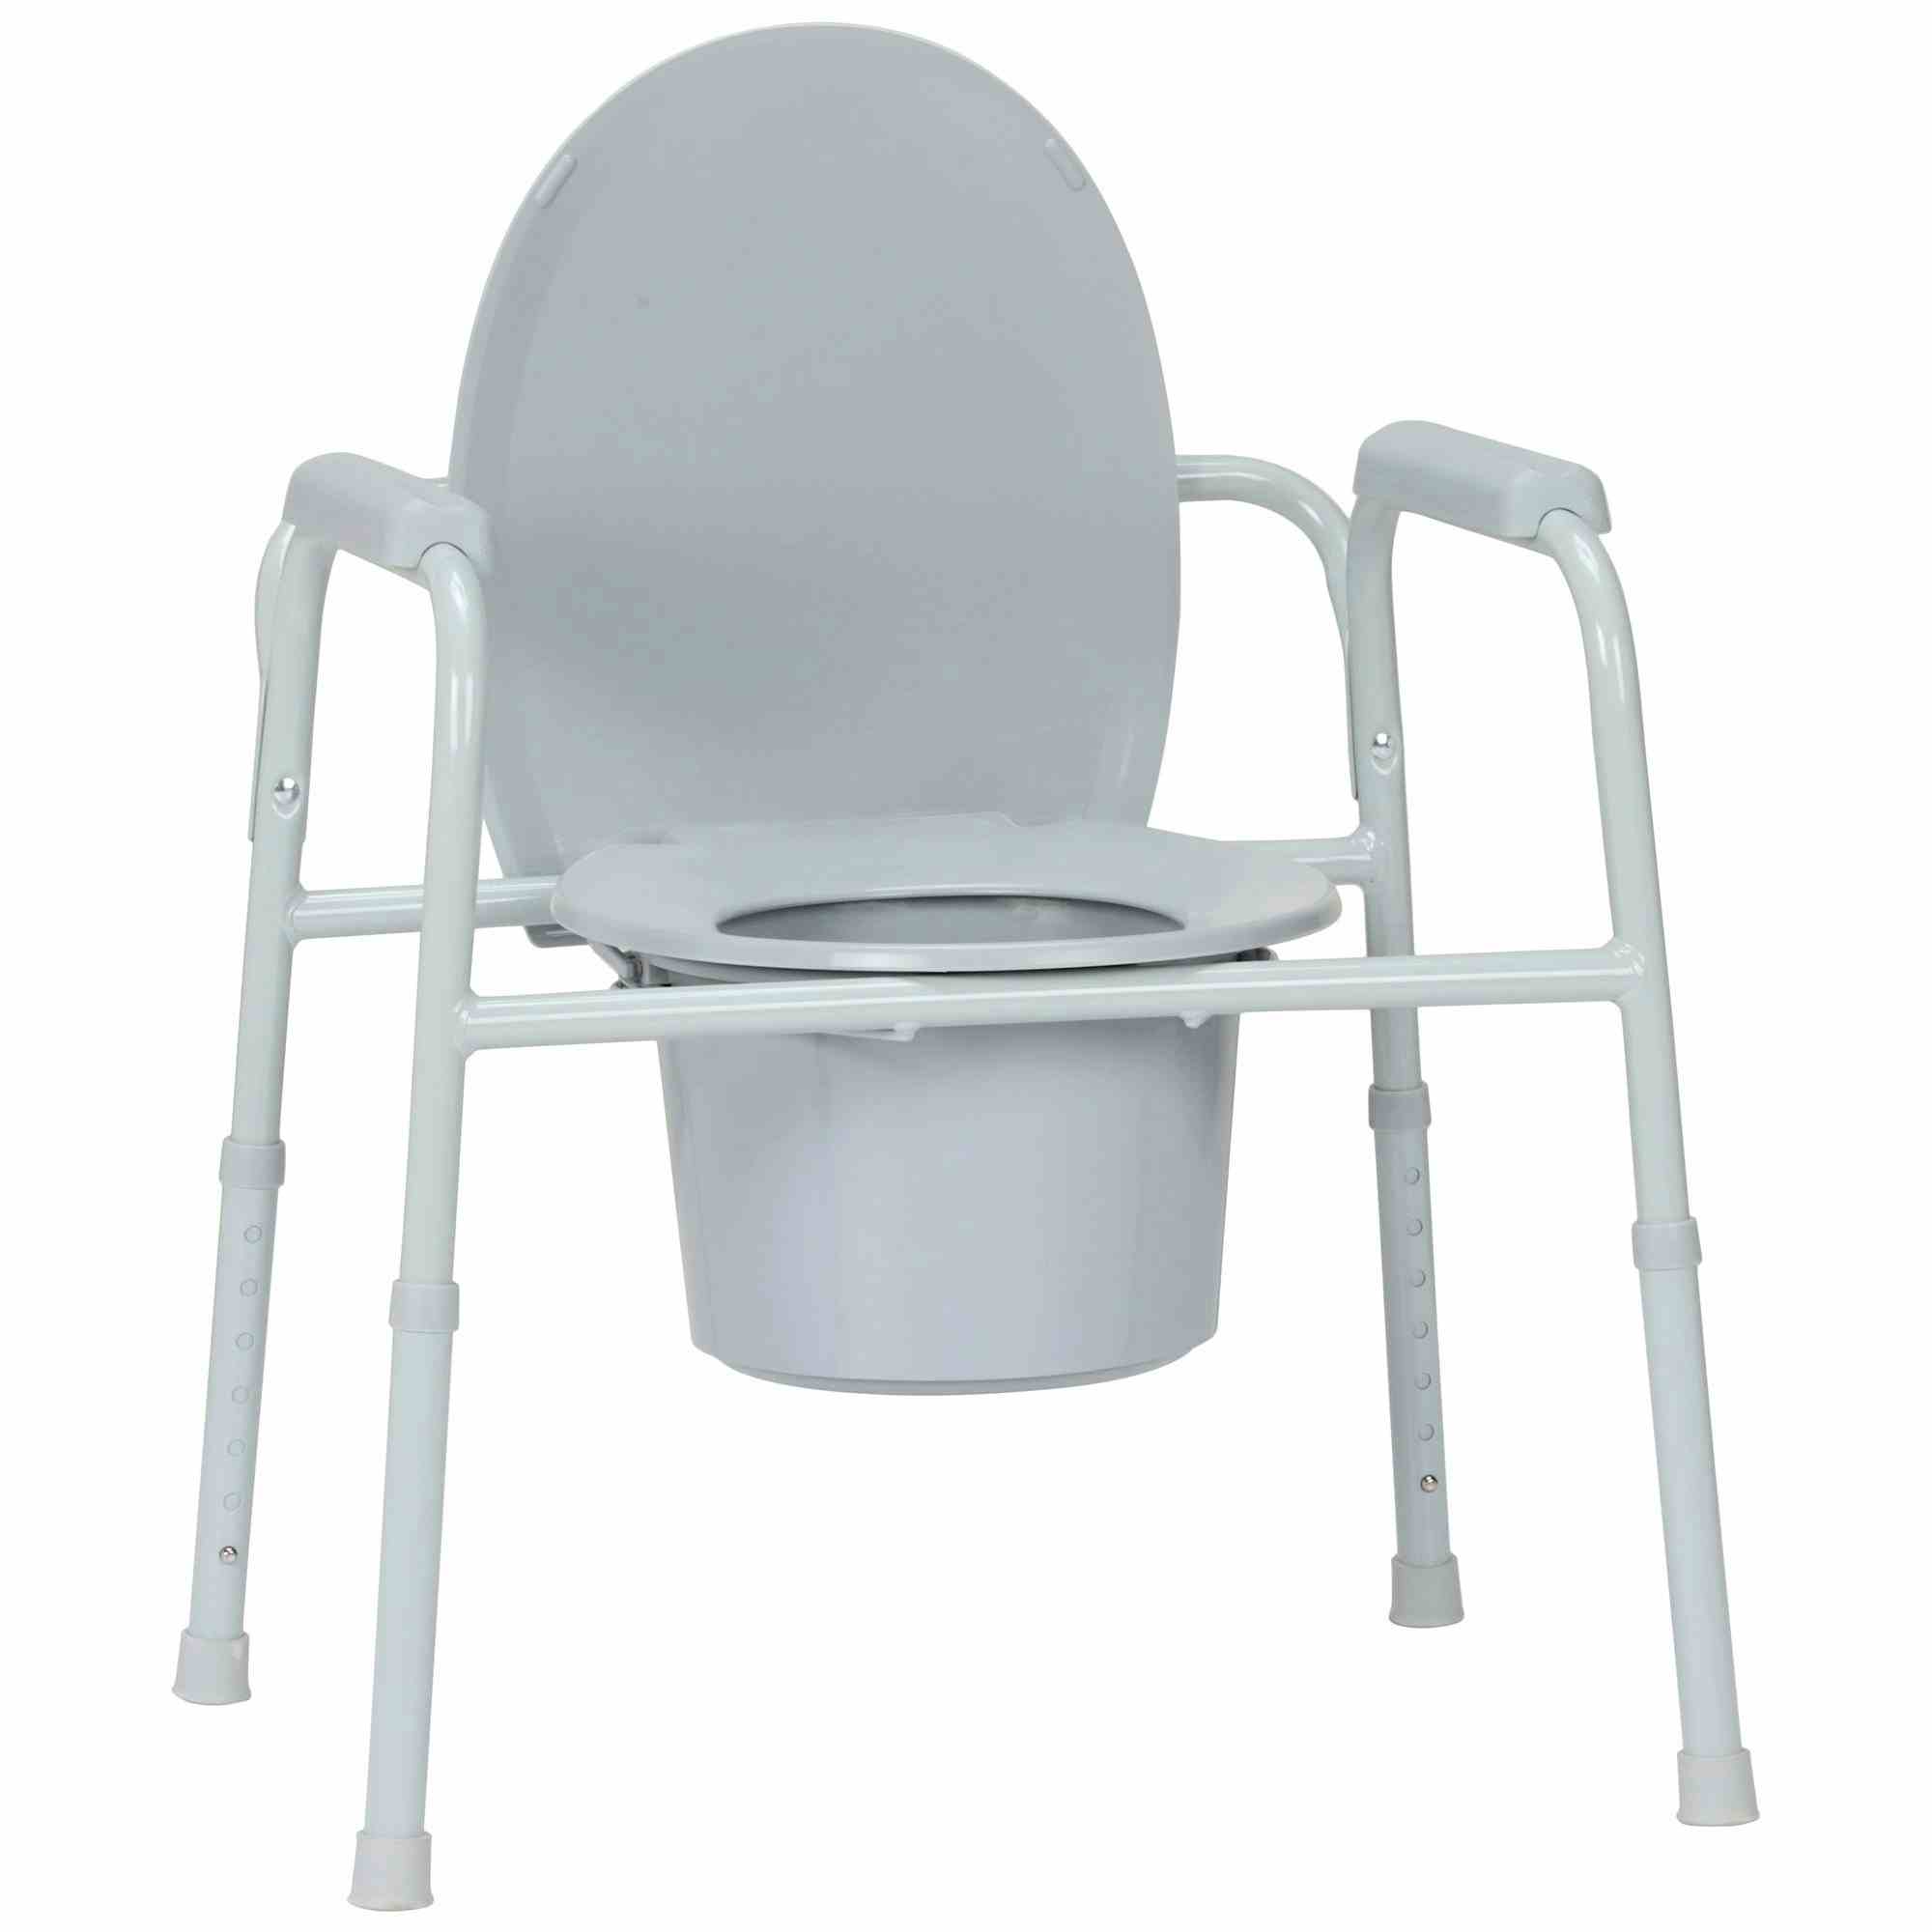 McKesson Commode Chair, Nonfolding, 146-11105N-4, Case of 4